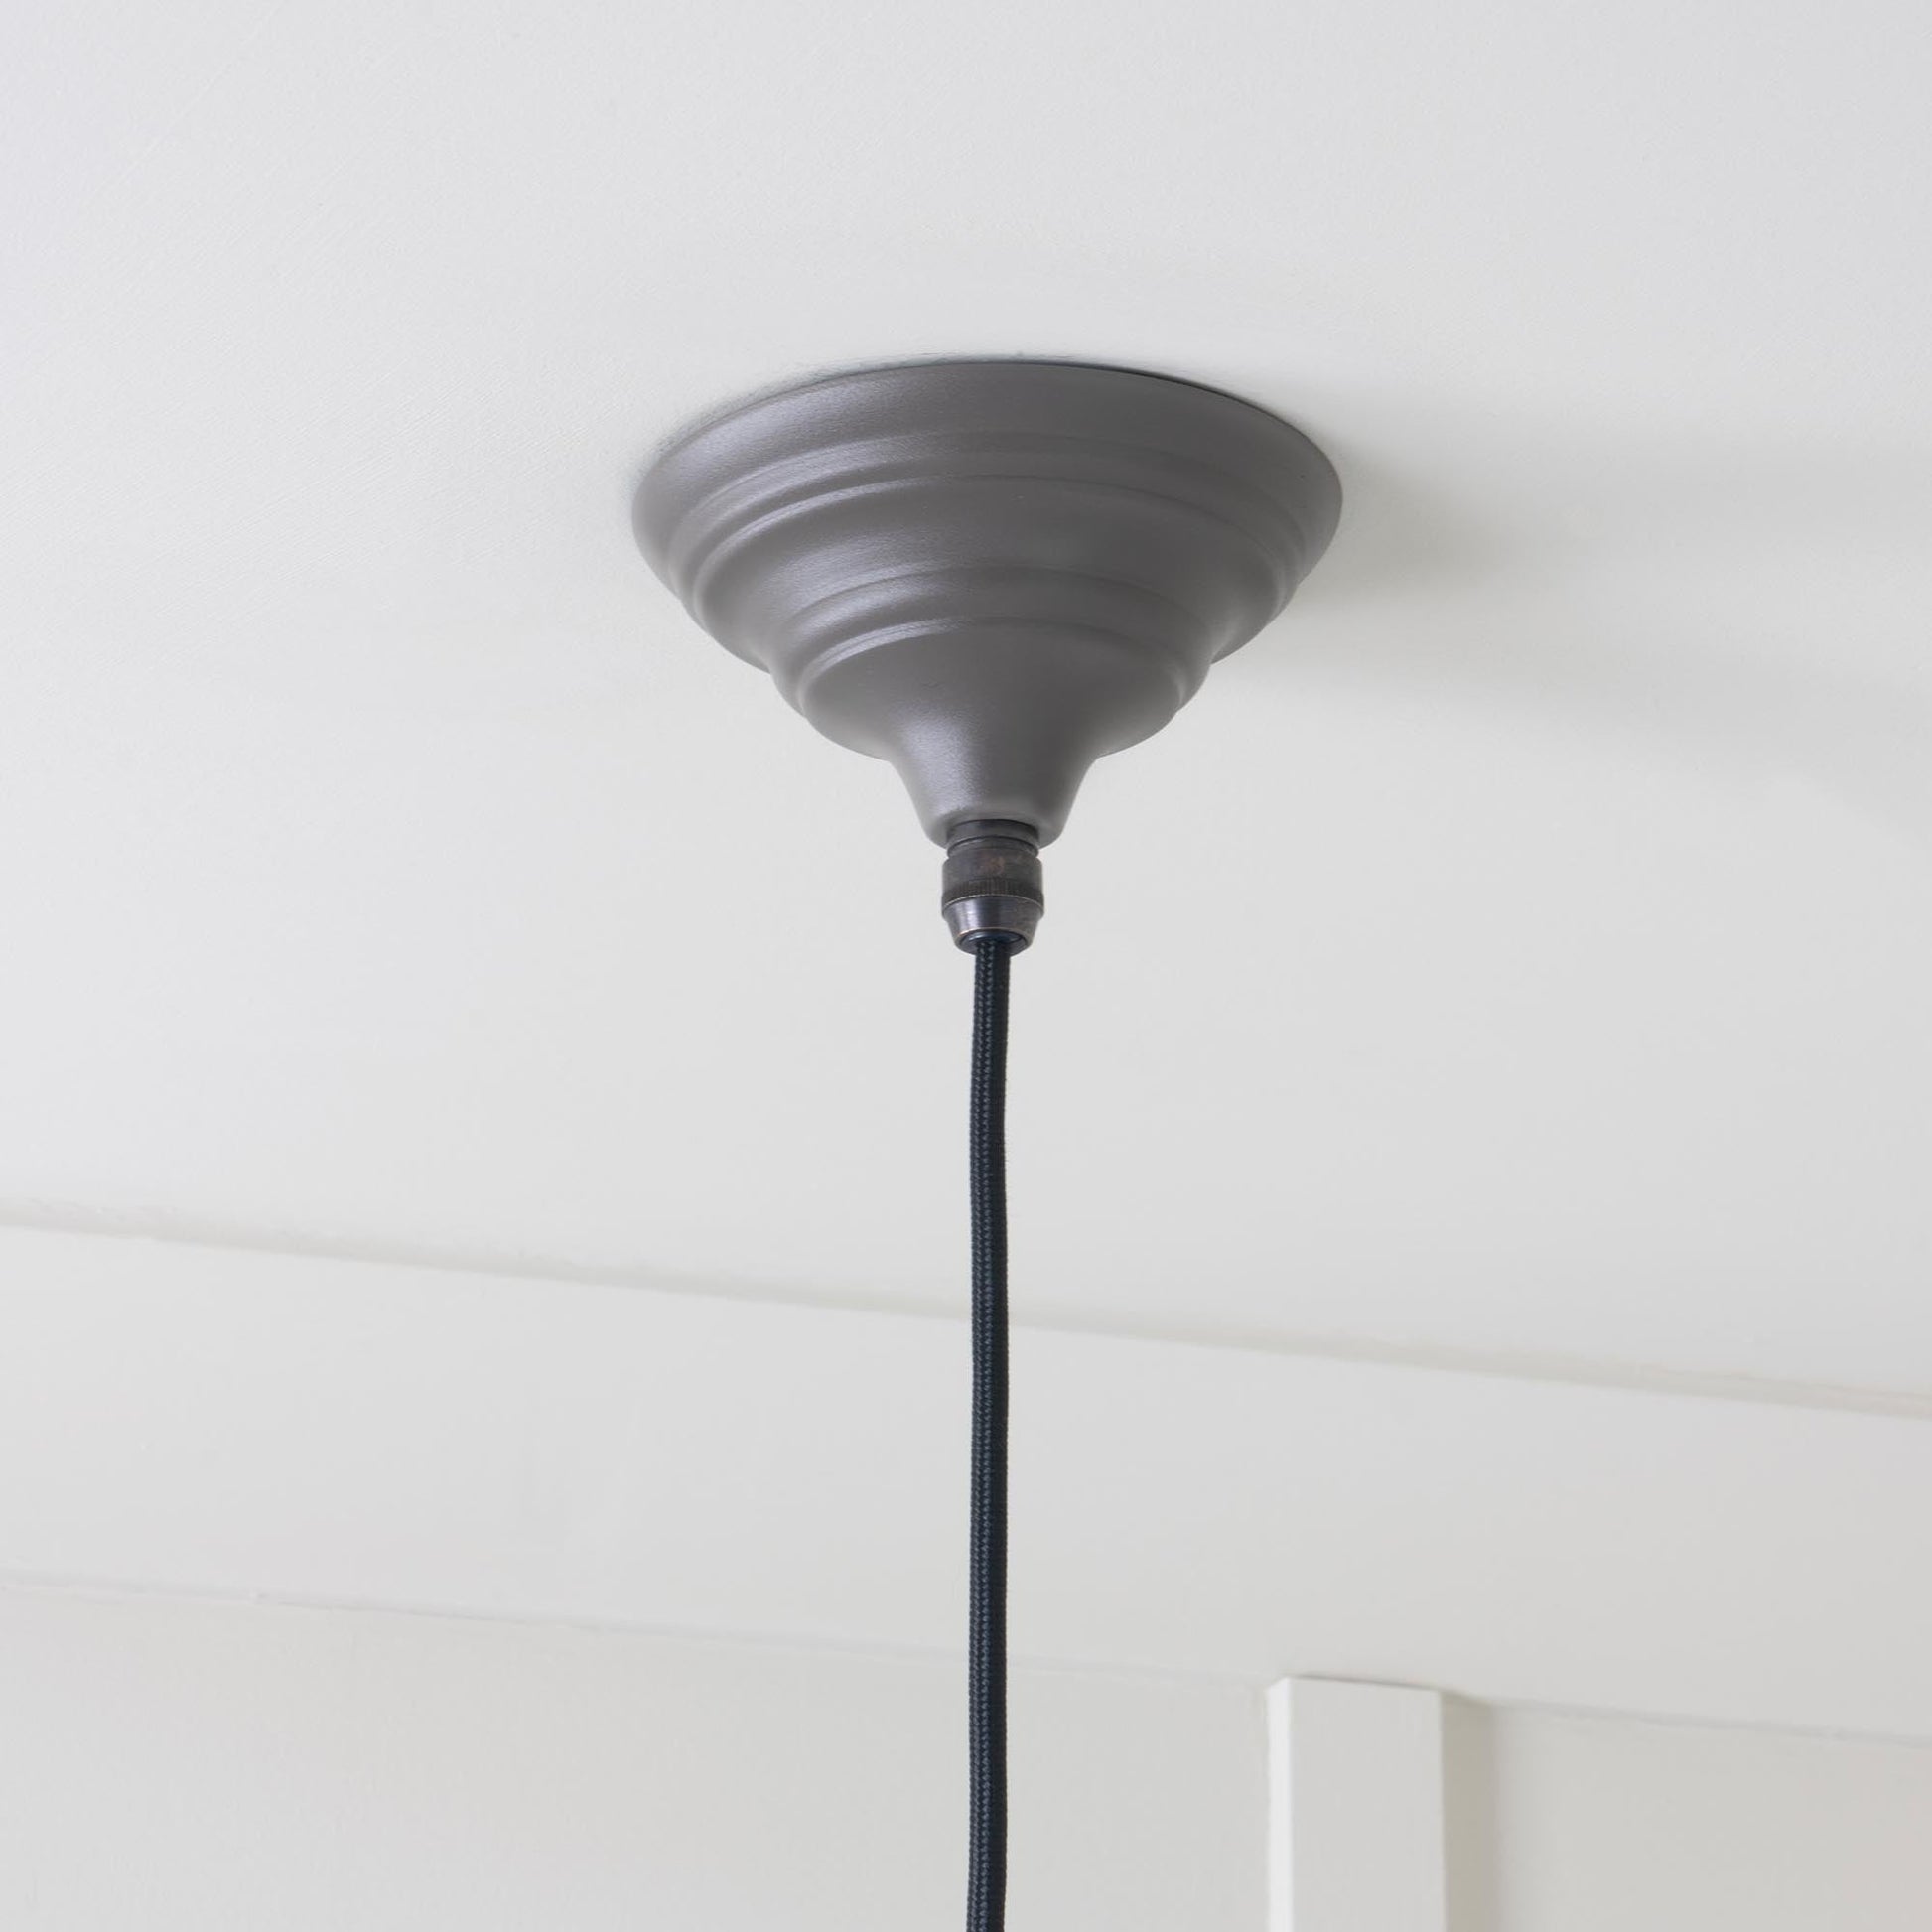 Hammered Nickel Harborne Pendant Light  Bluff, close up view of fitting and cable.